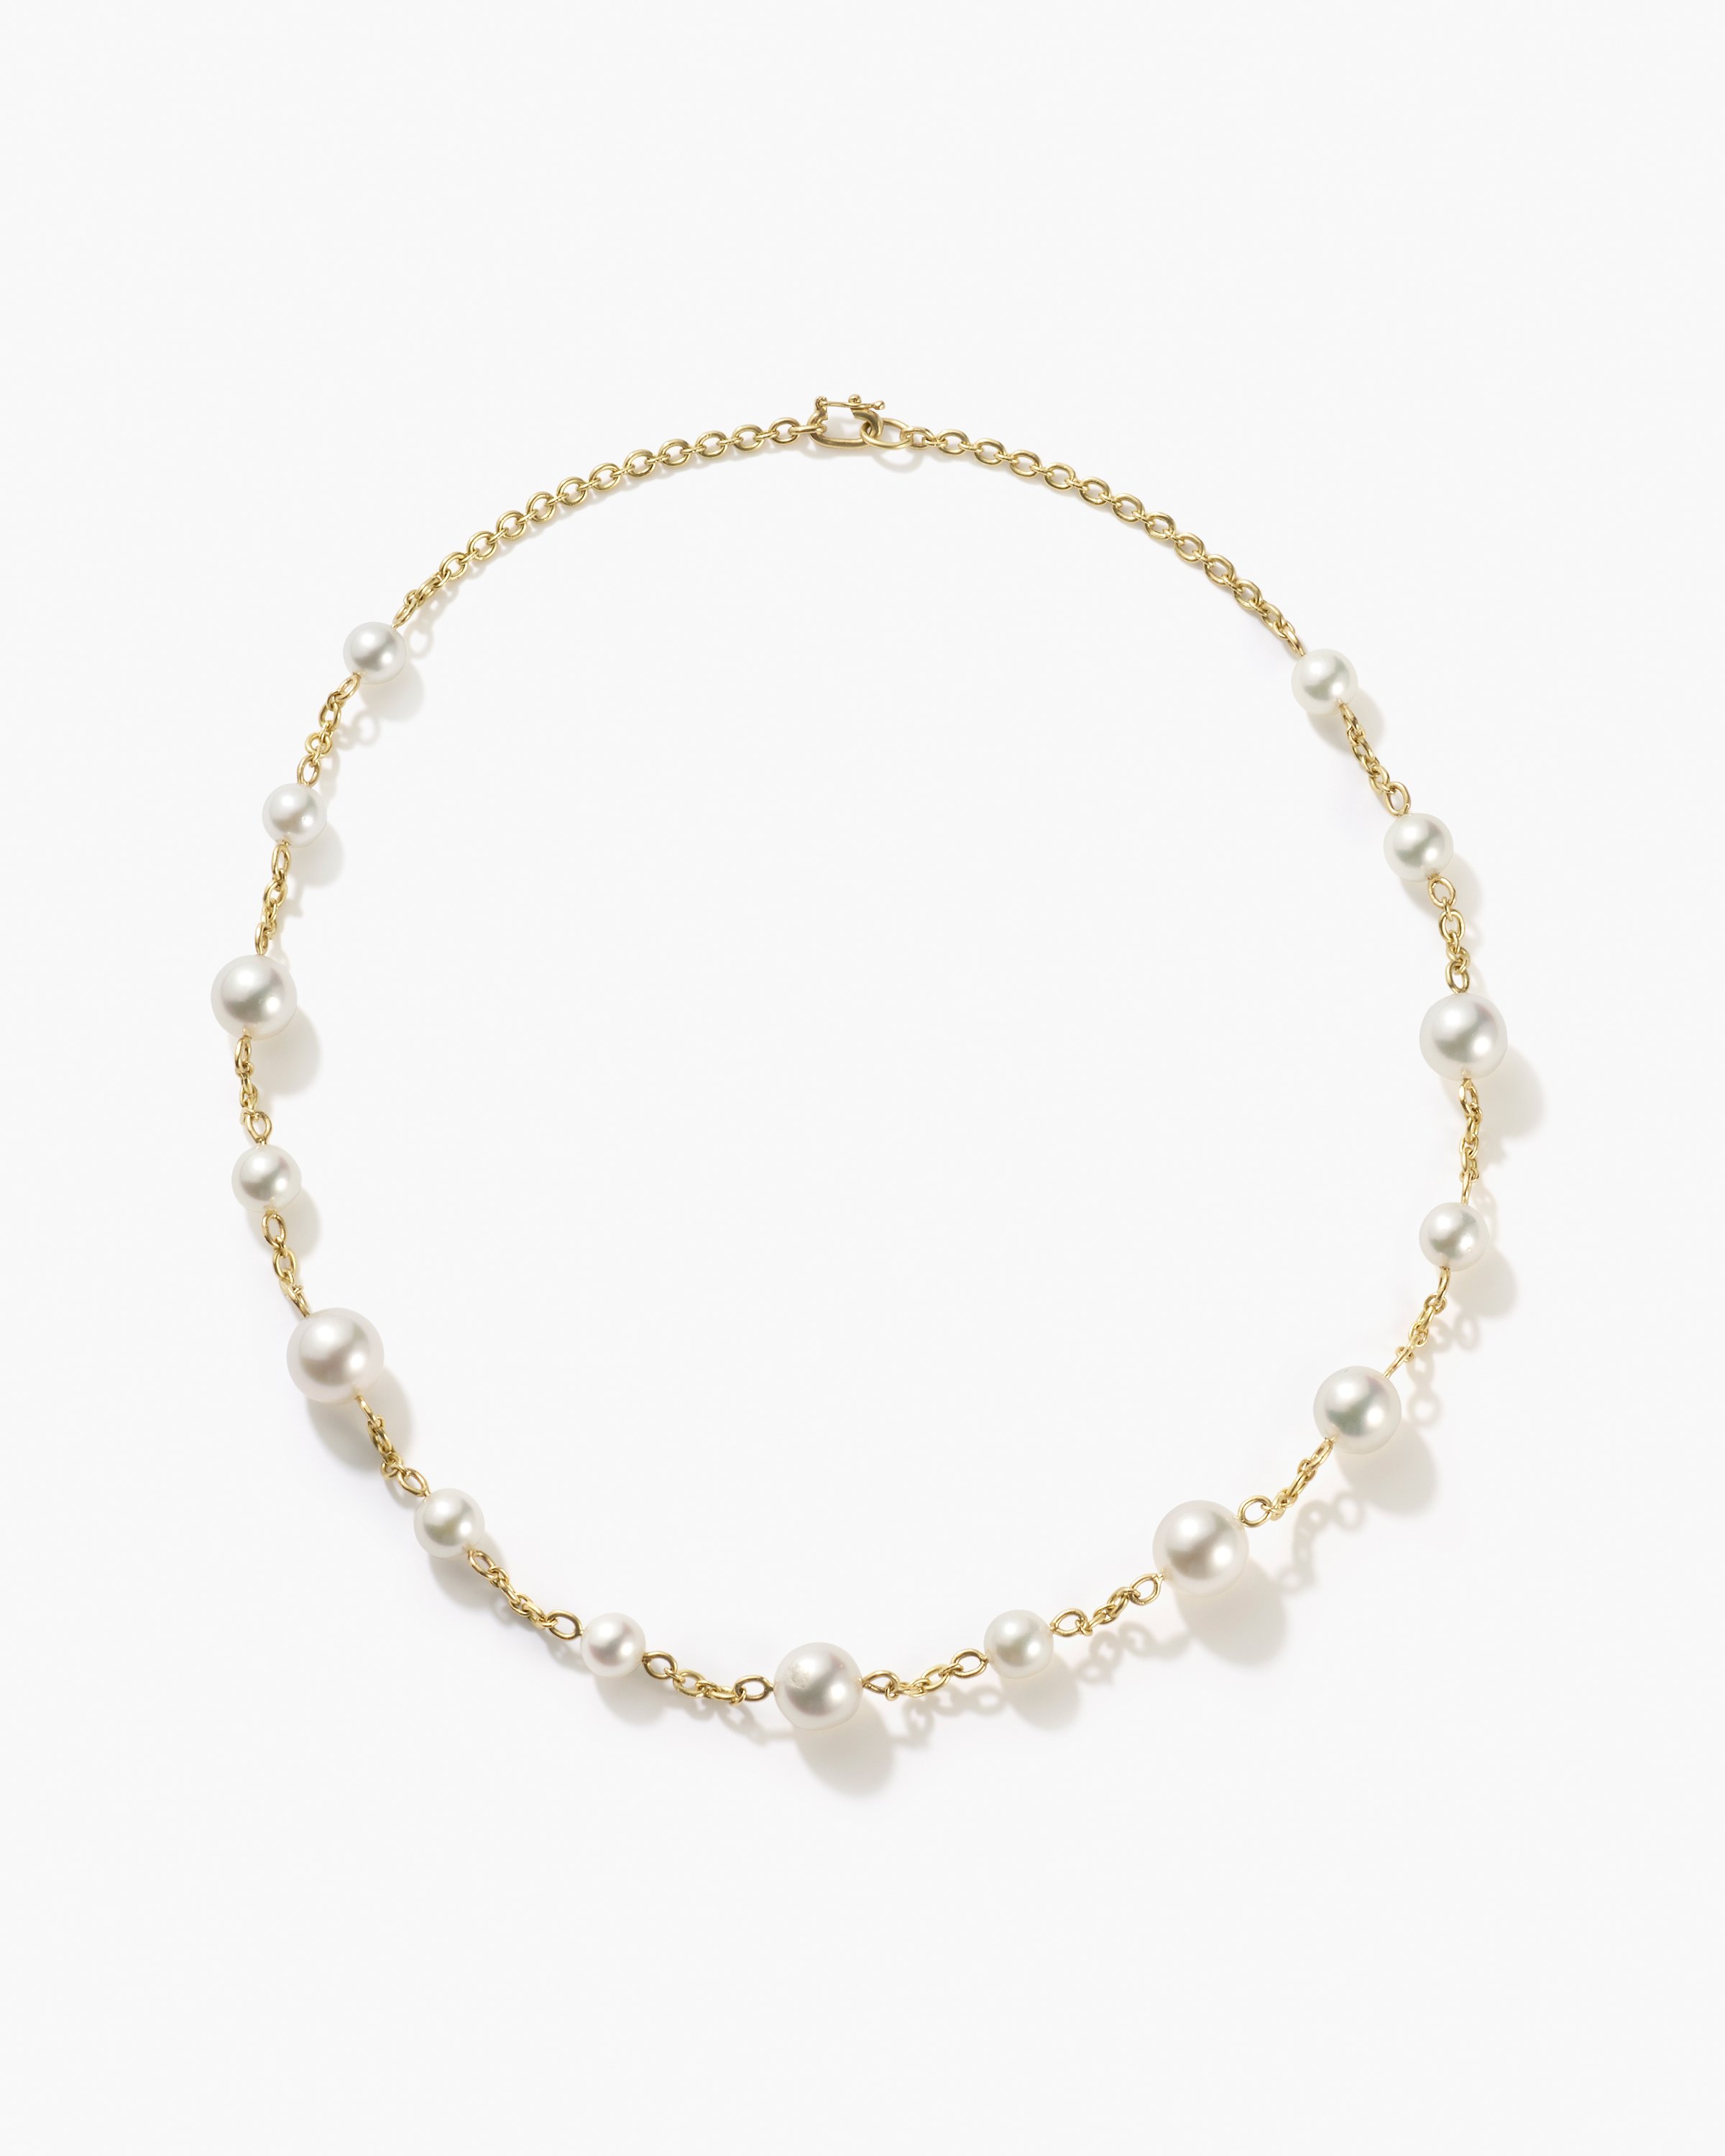 Irene Neuwirth Gumball Link Pearl Necklace